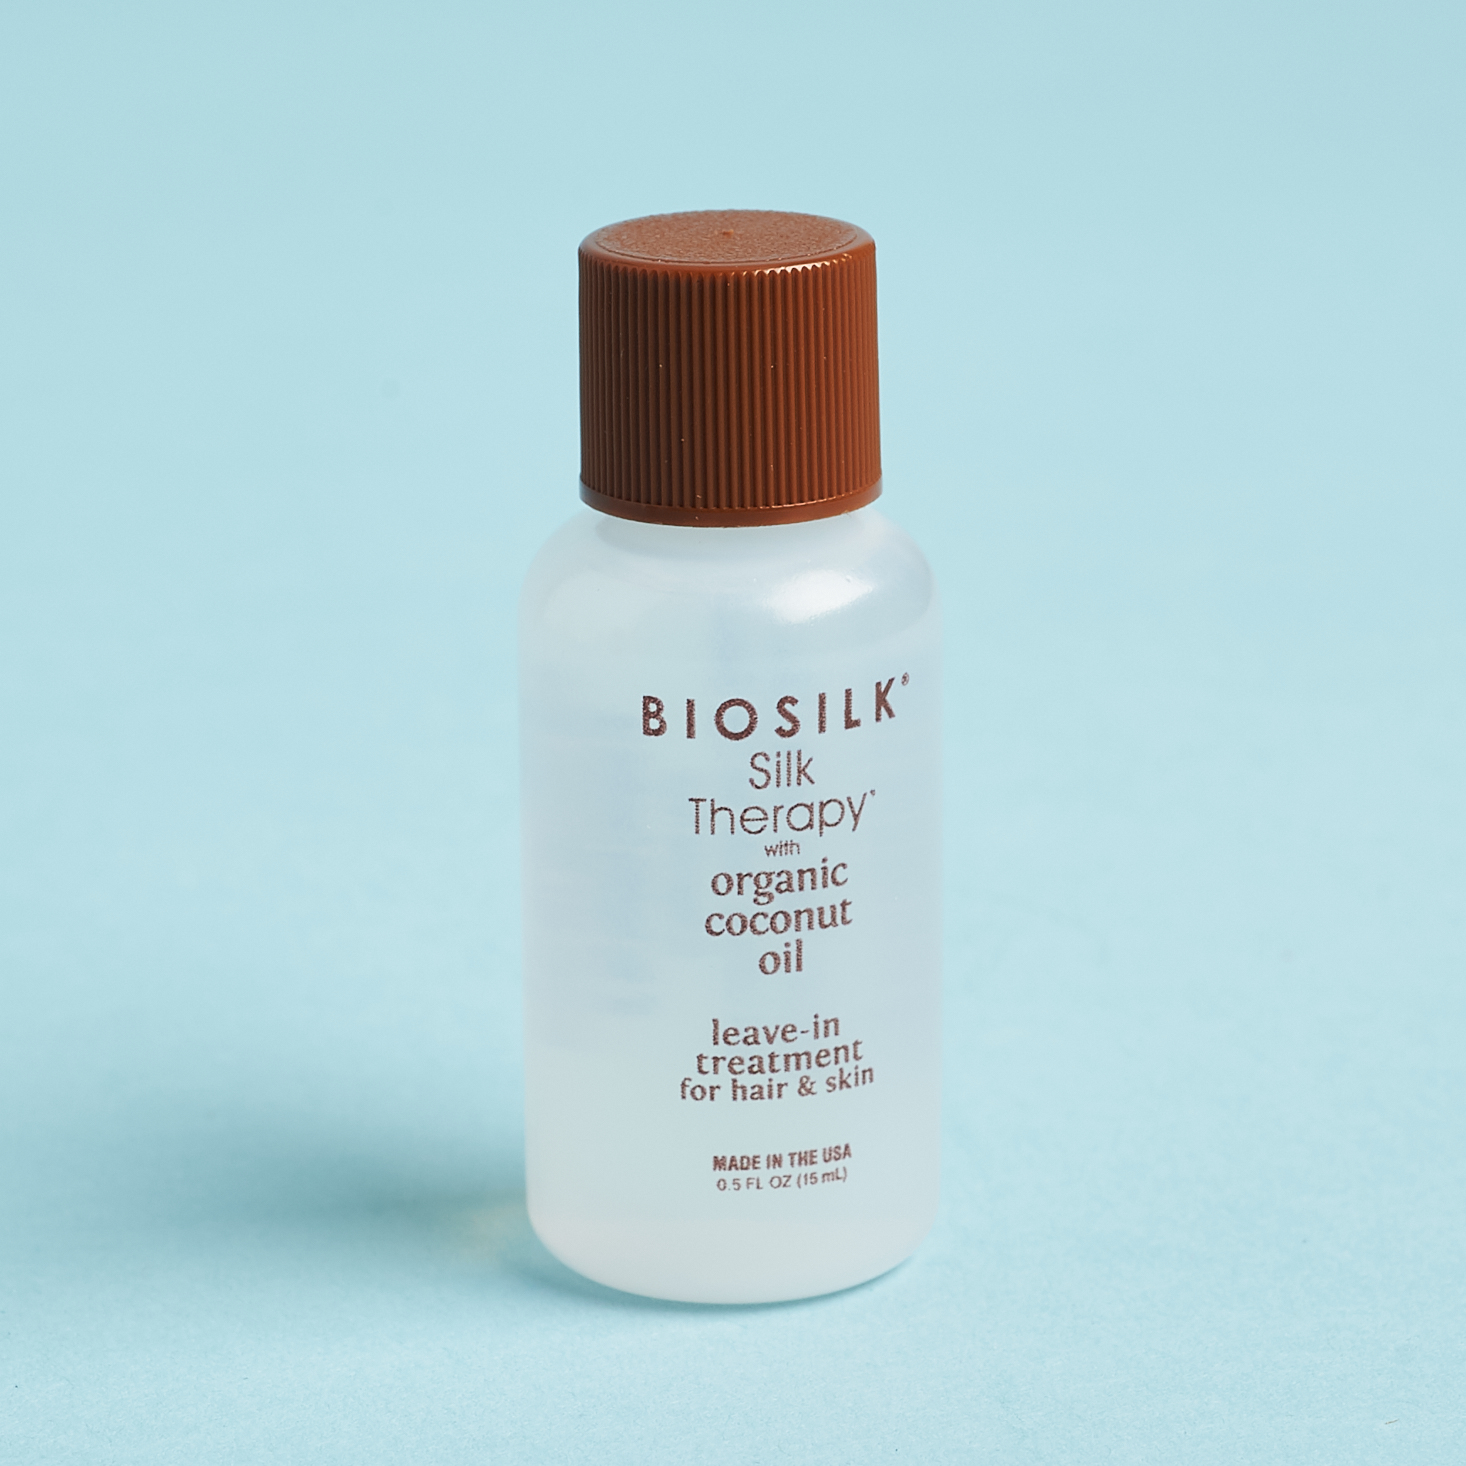 clear bottle of biosilk with brown cap